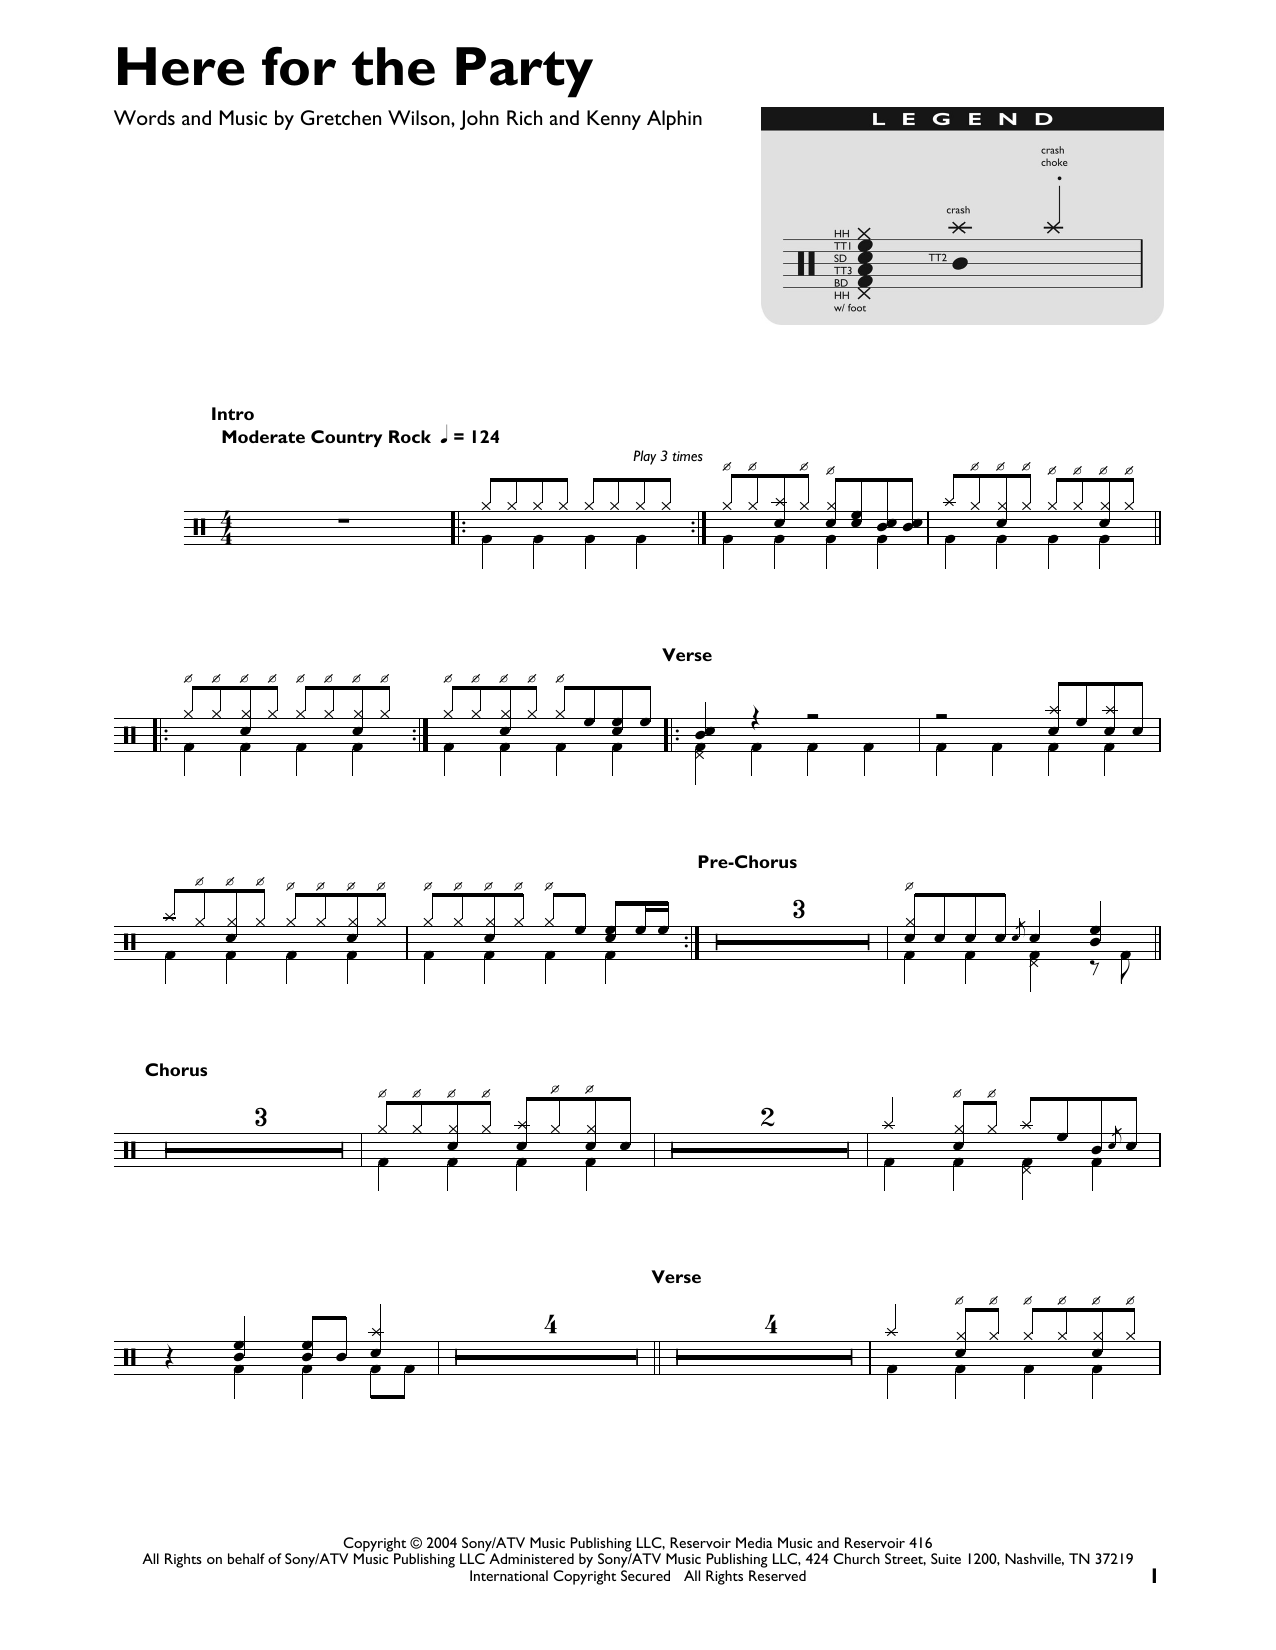 Download Gretchen Wilson Here For The Party Sheet Music